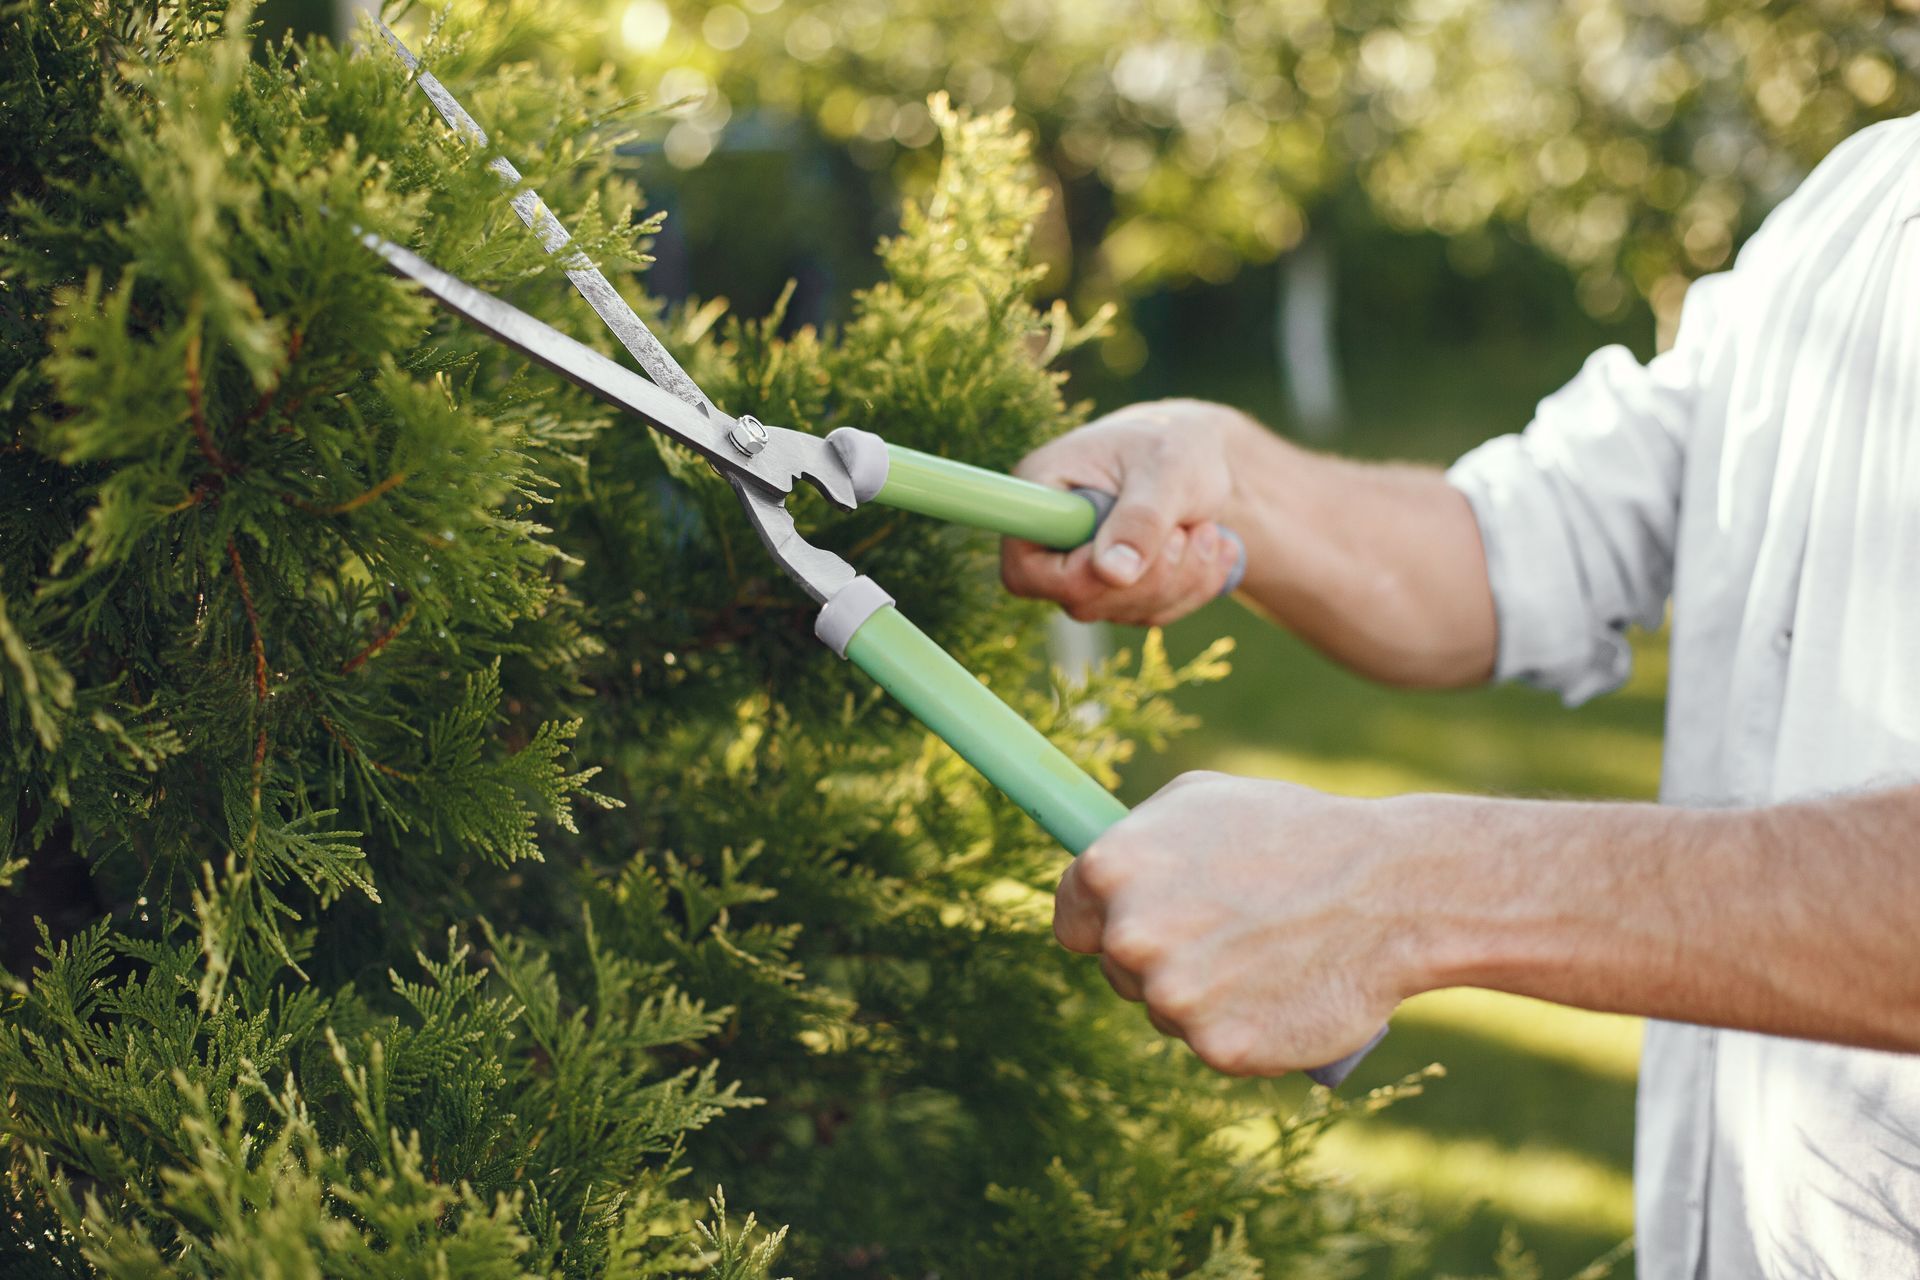 a person is cutting a tree with a pair of scissors